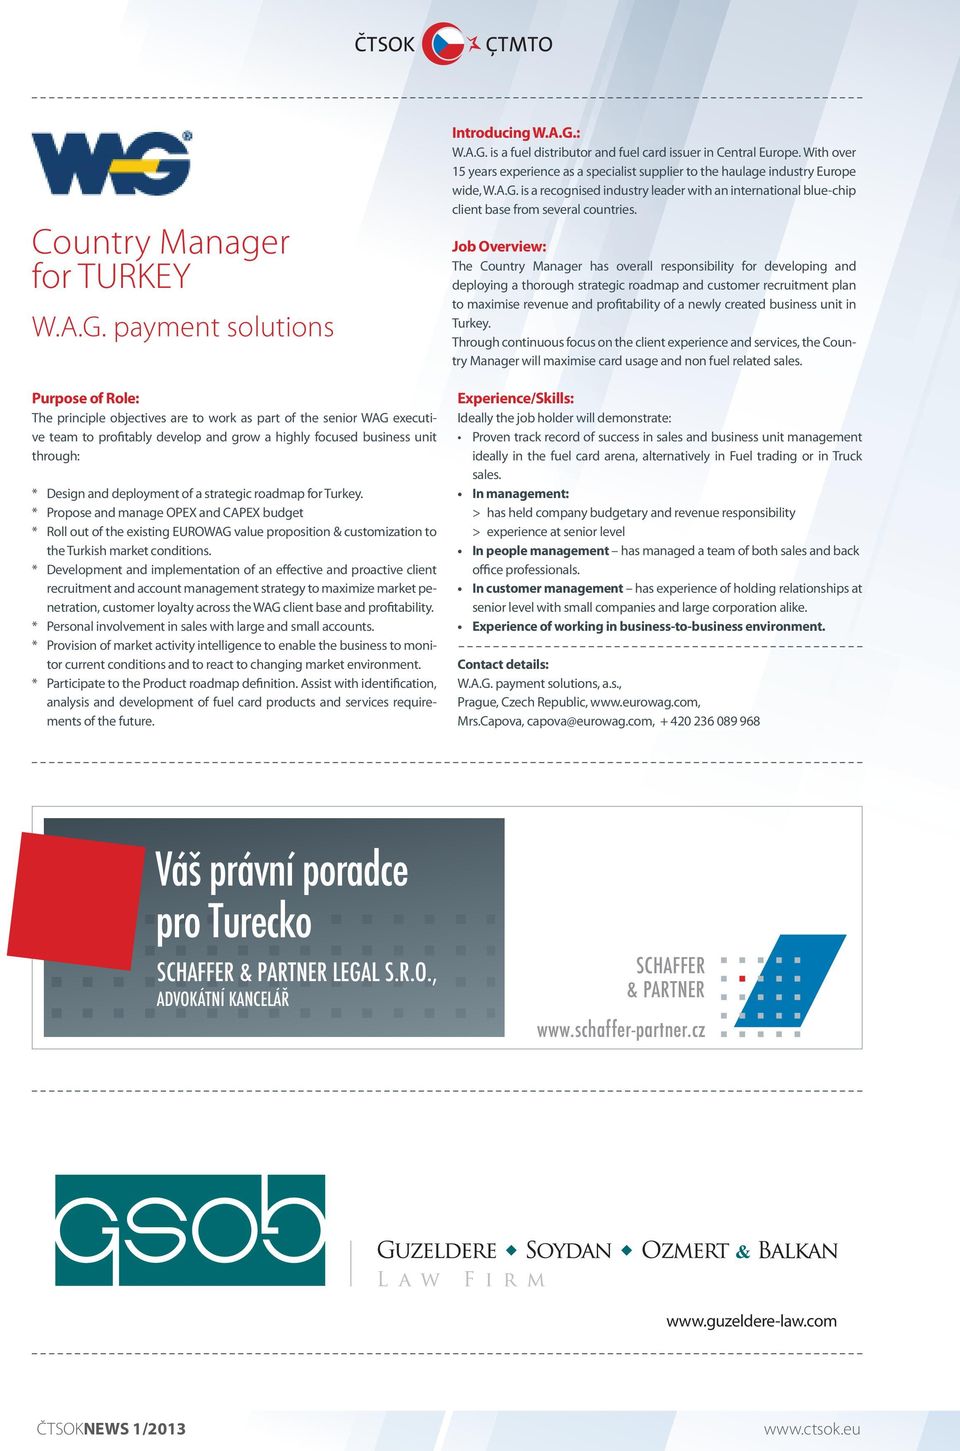 deployment of a strategic roadmap for Turkey. * Propose and manage OPEX and CAPEX budget * Roll out of the existing EUROWAG value proposition & customization to the Turkish market conditions.